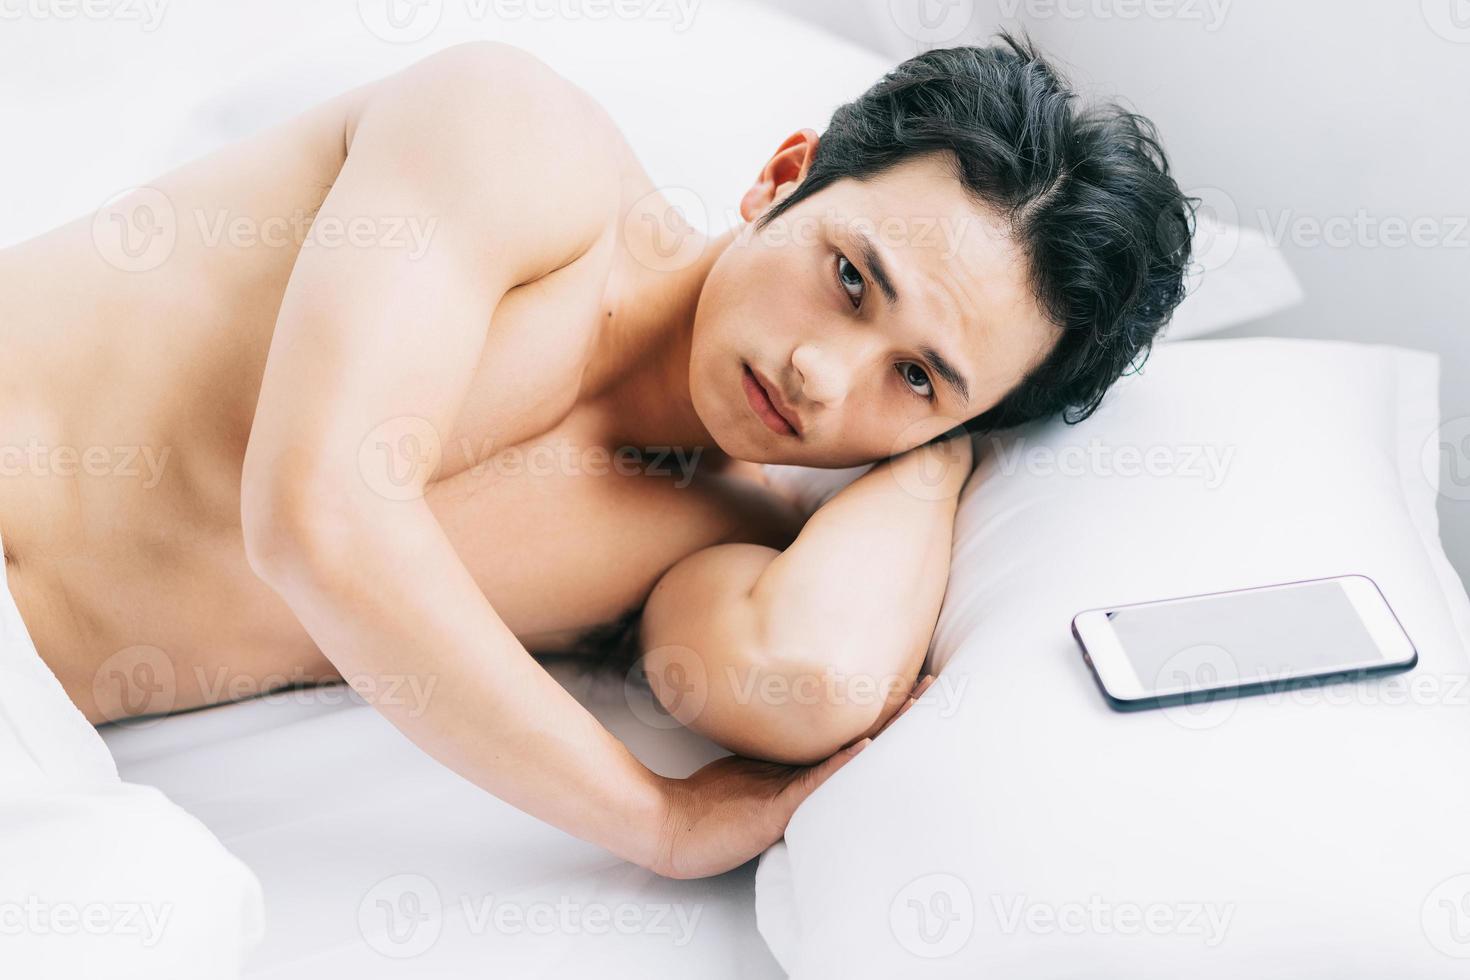 The muscular man is lying on the bed photo